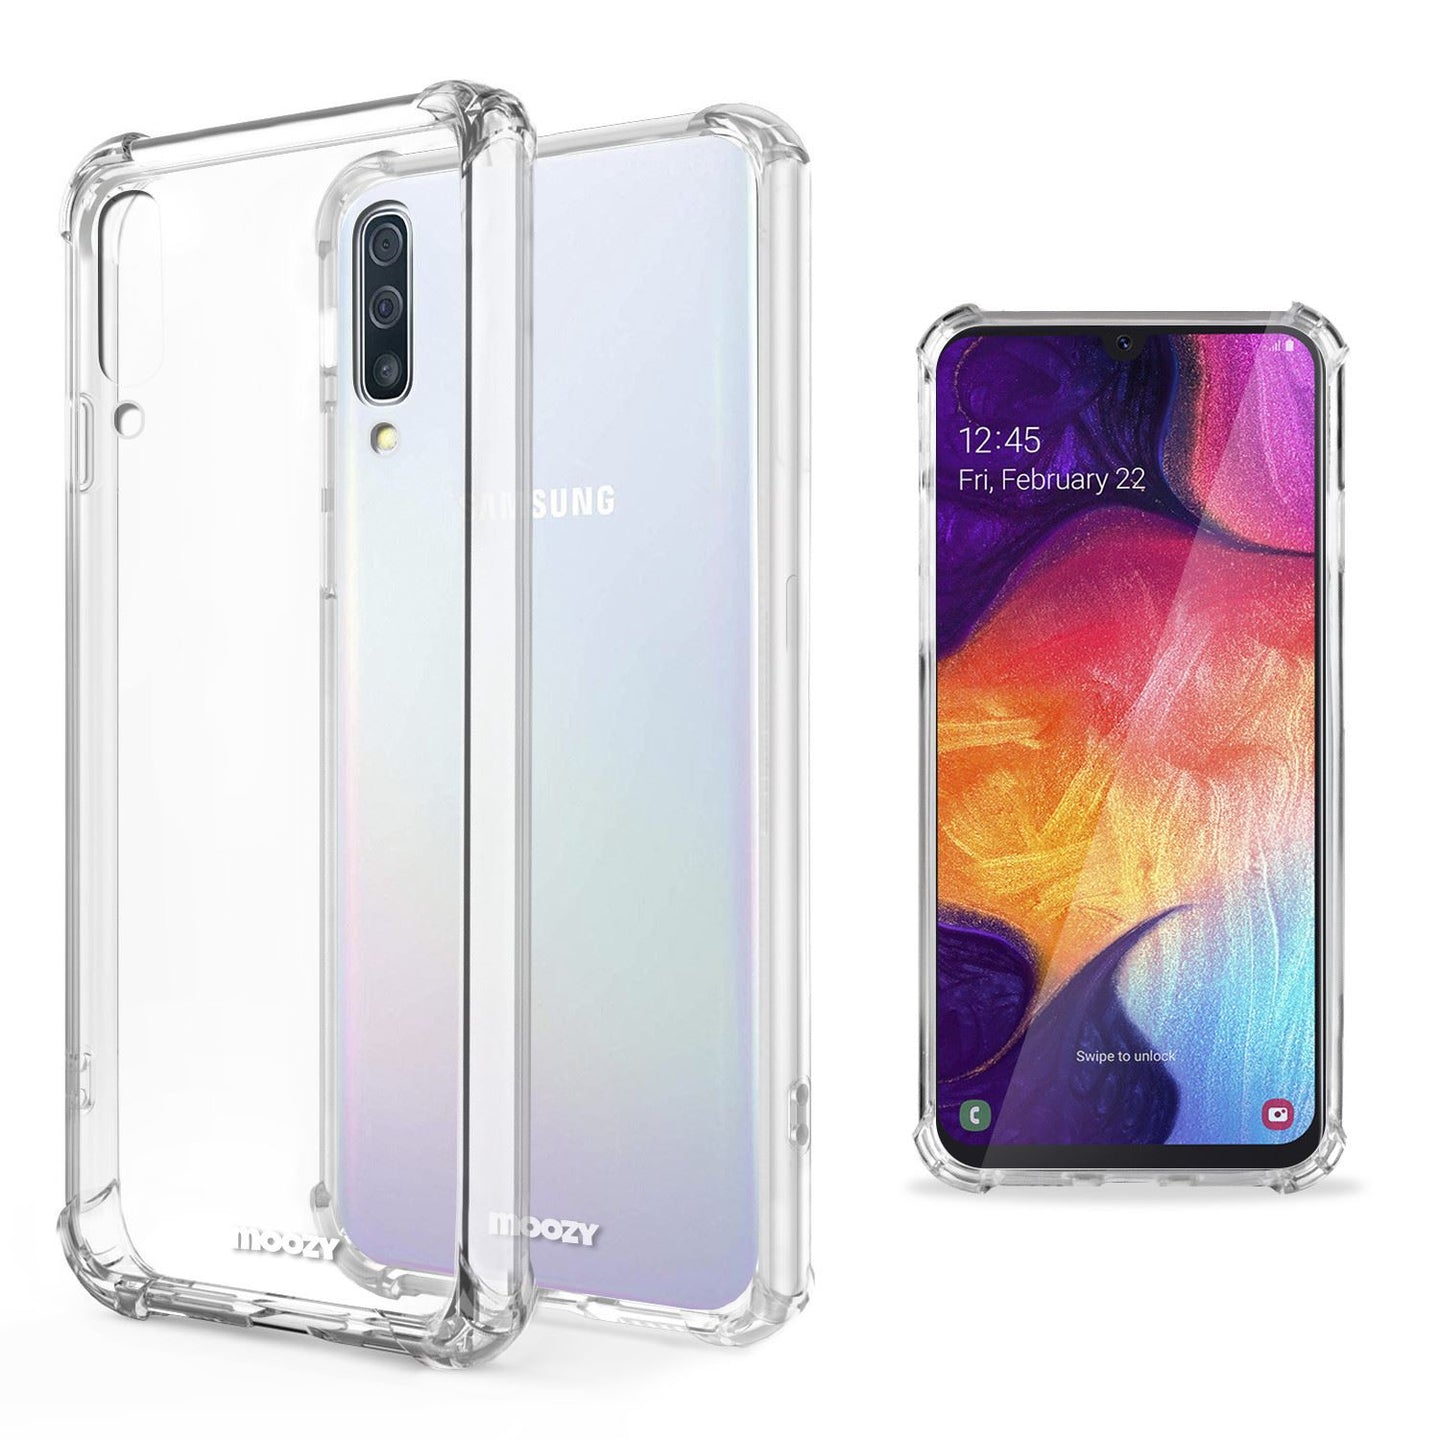 Moozy Shock Proof Silicone Case for Samsung A50 - Transparent Crystal Clear Phone Case Soft TPU Cover